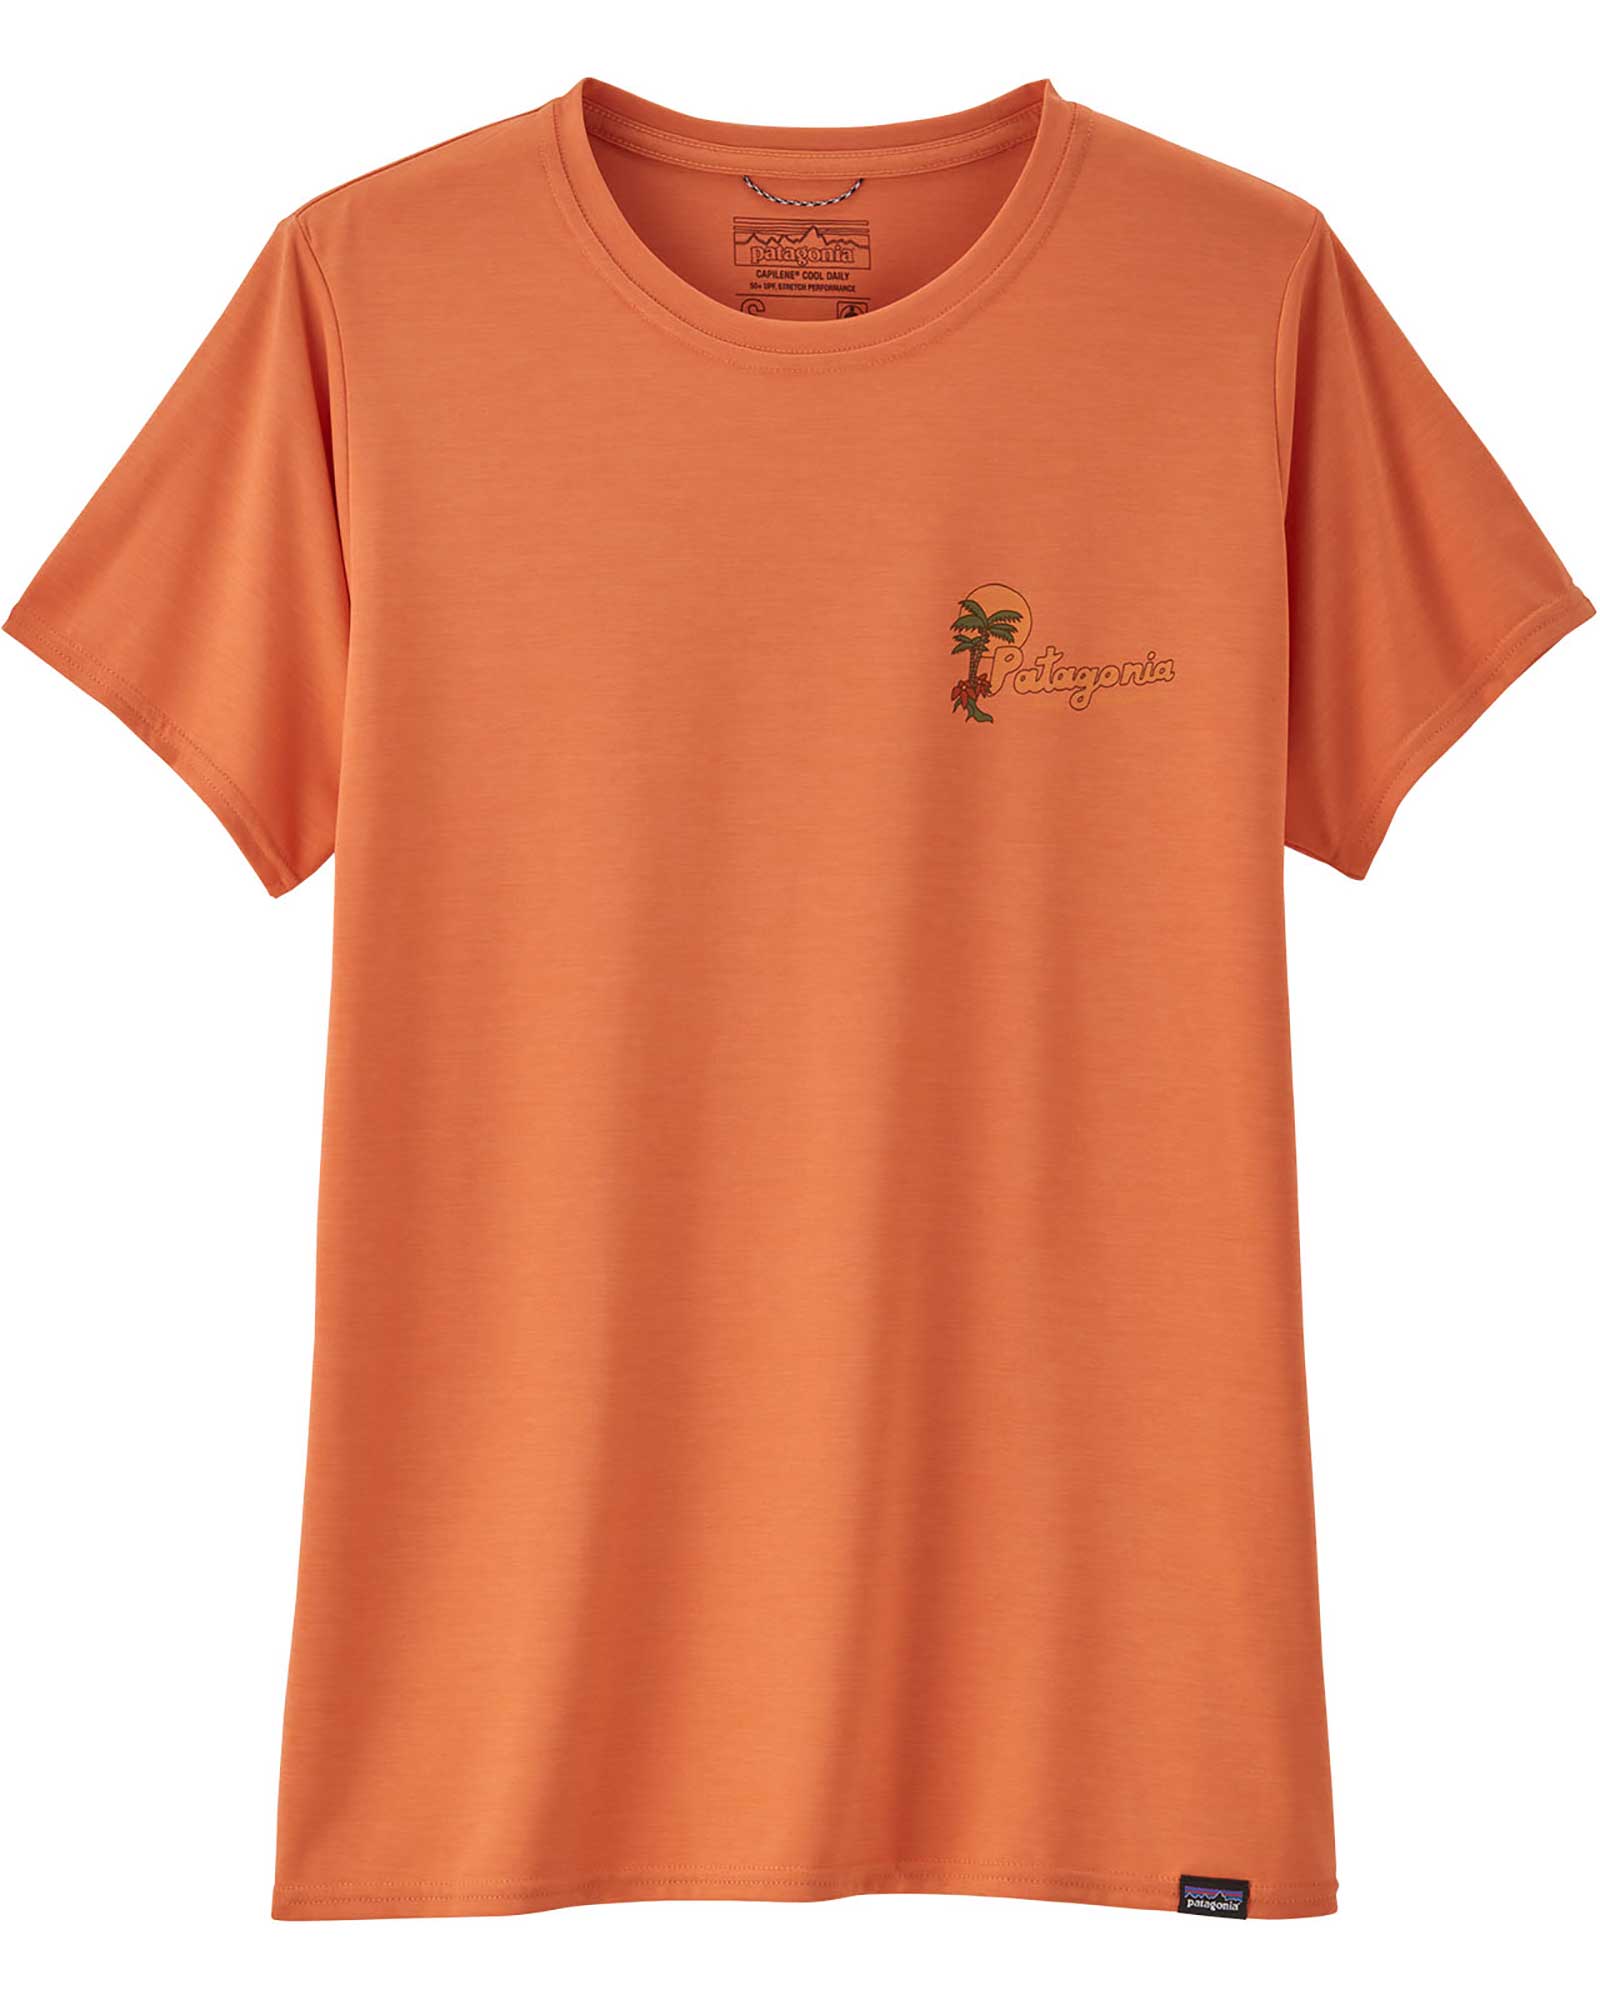 Patagonia Capilene Cool Daily Graphic Women’s T Shirt - Tigerlily Orange/Palm Protest S